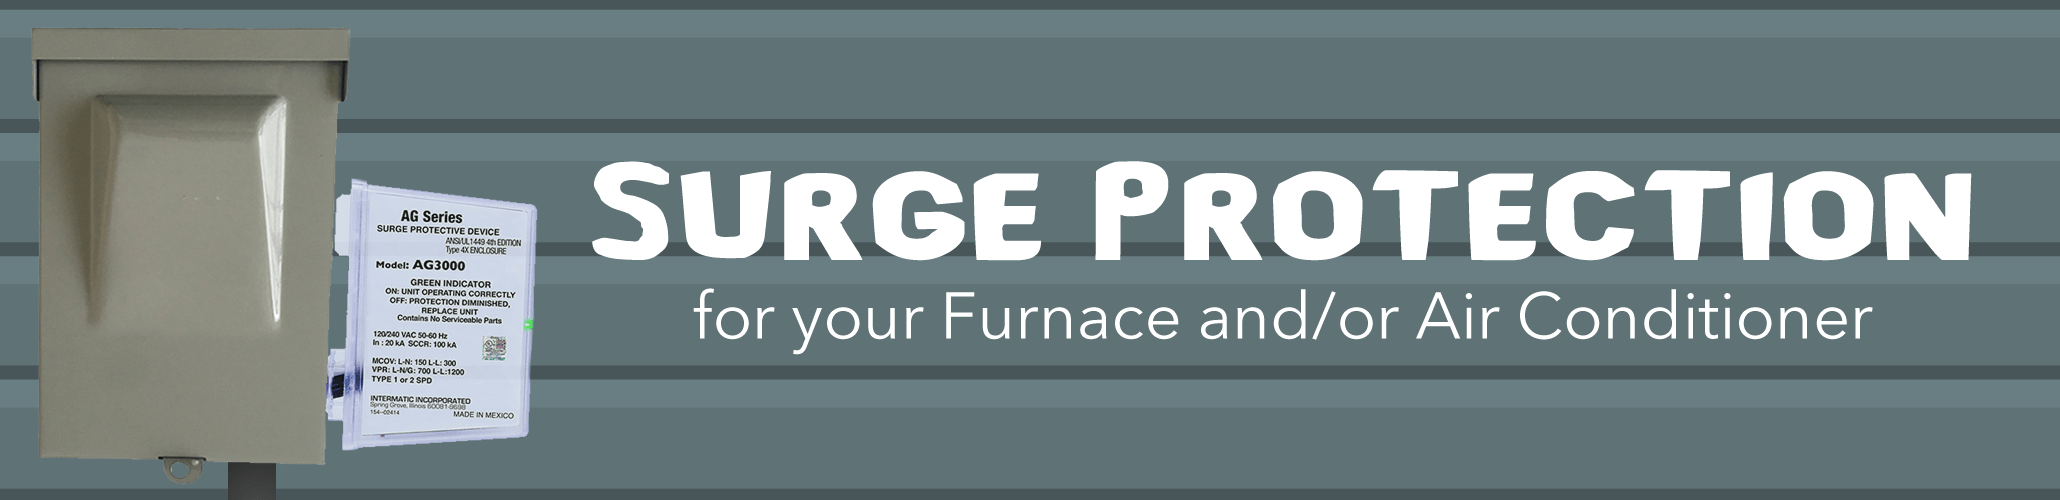 Surge Protection for your Furnace and/or Air Conditioner